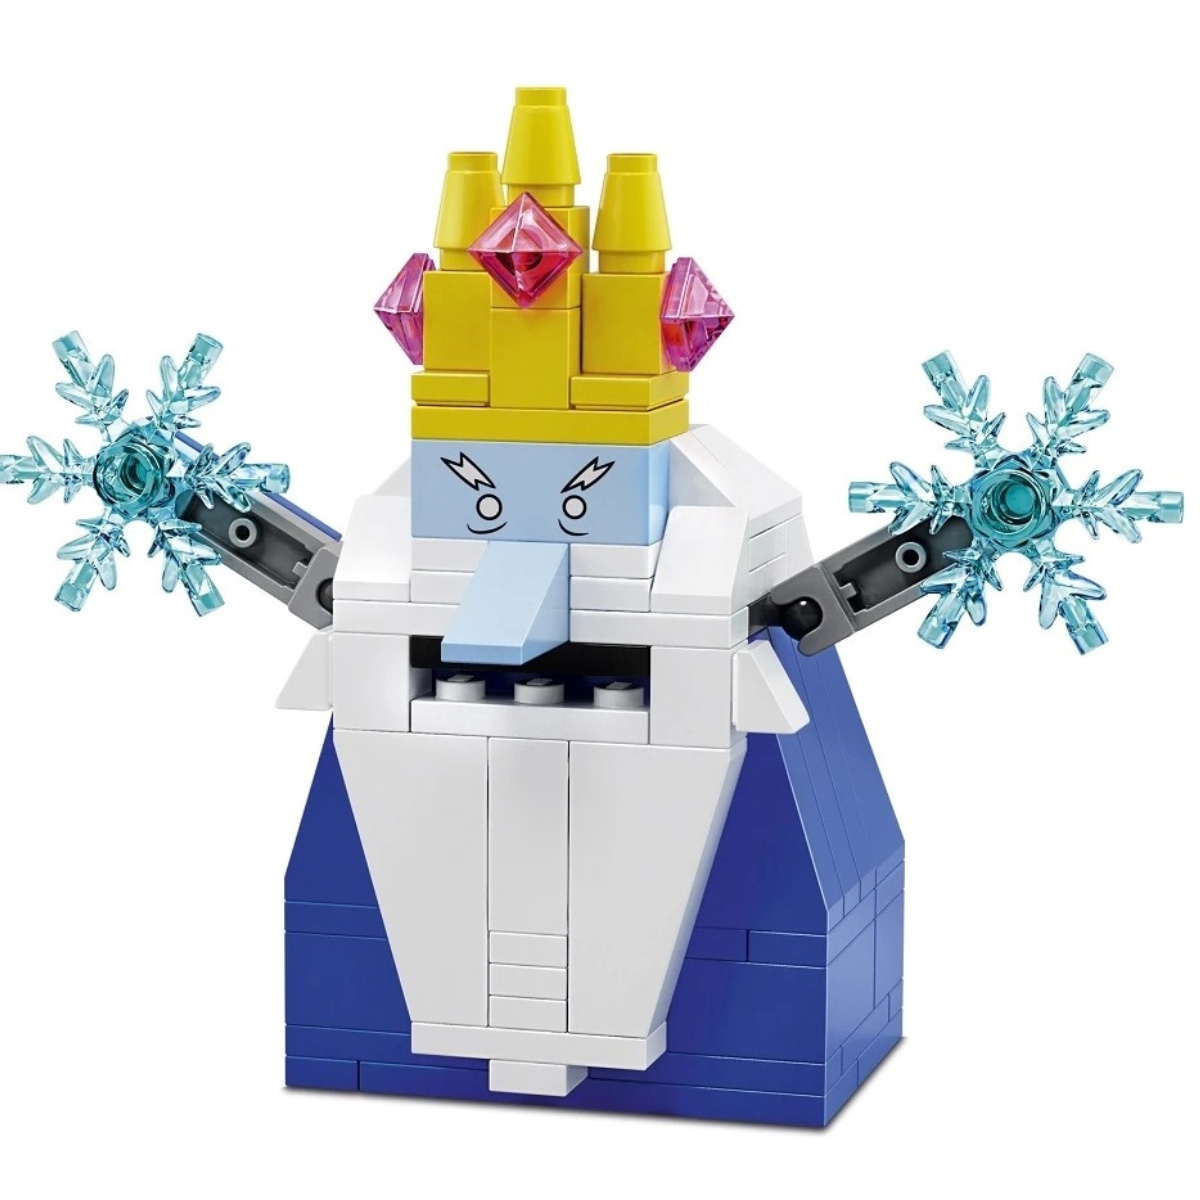 19-facts-about-ice-king-the-lego-movie